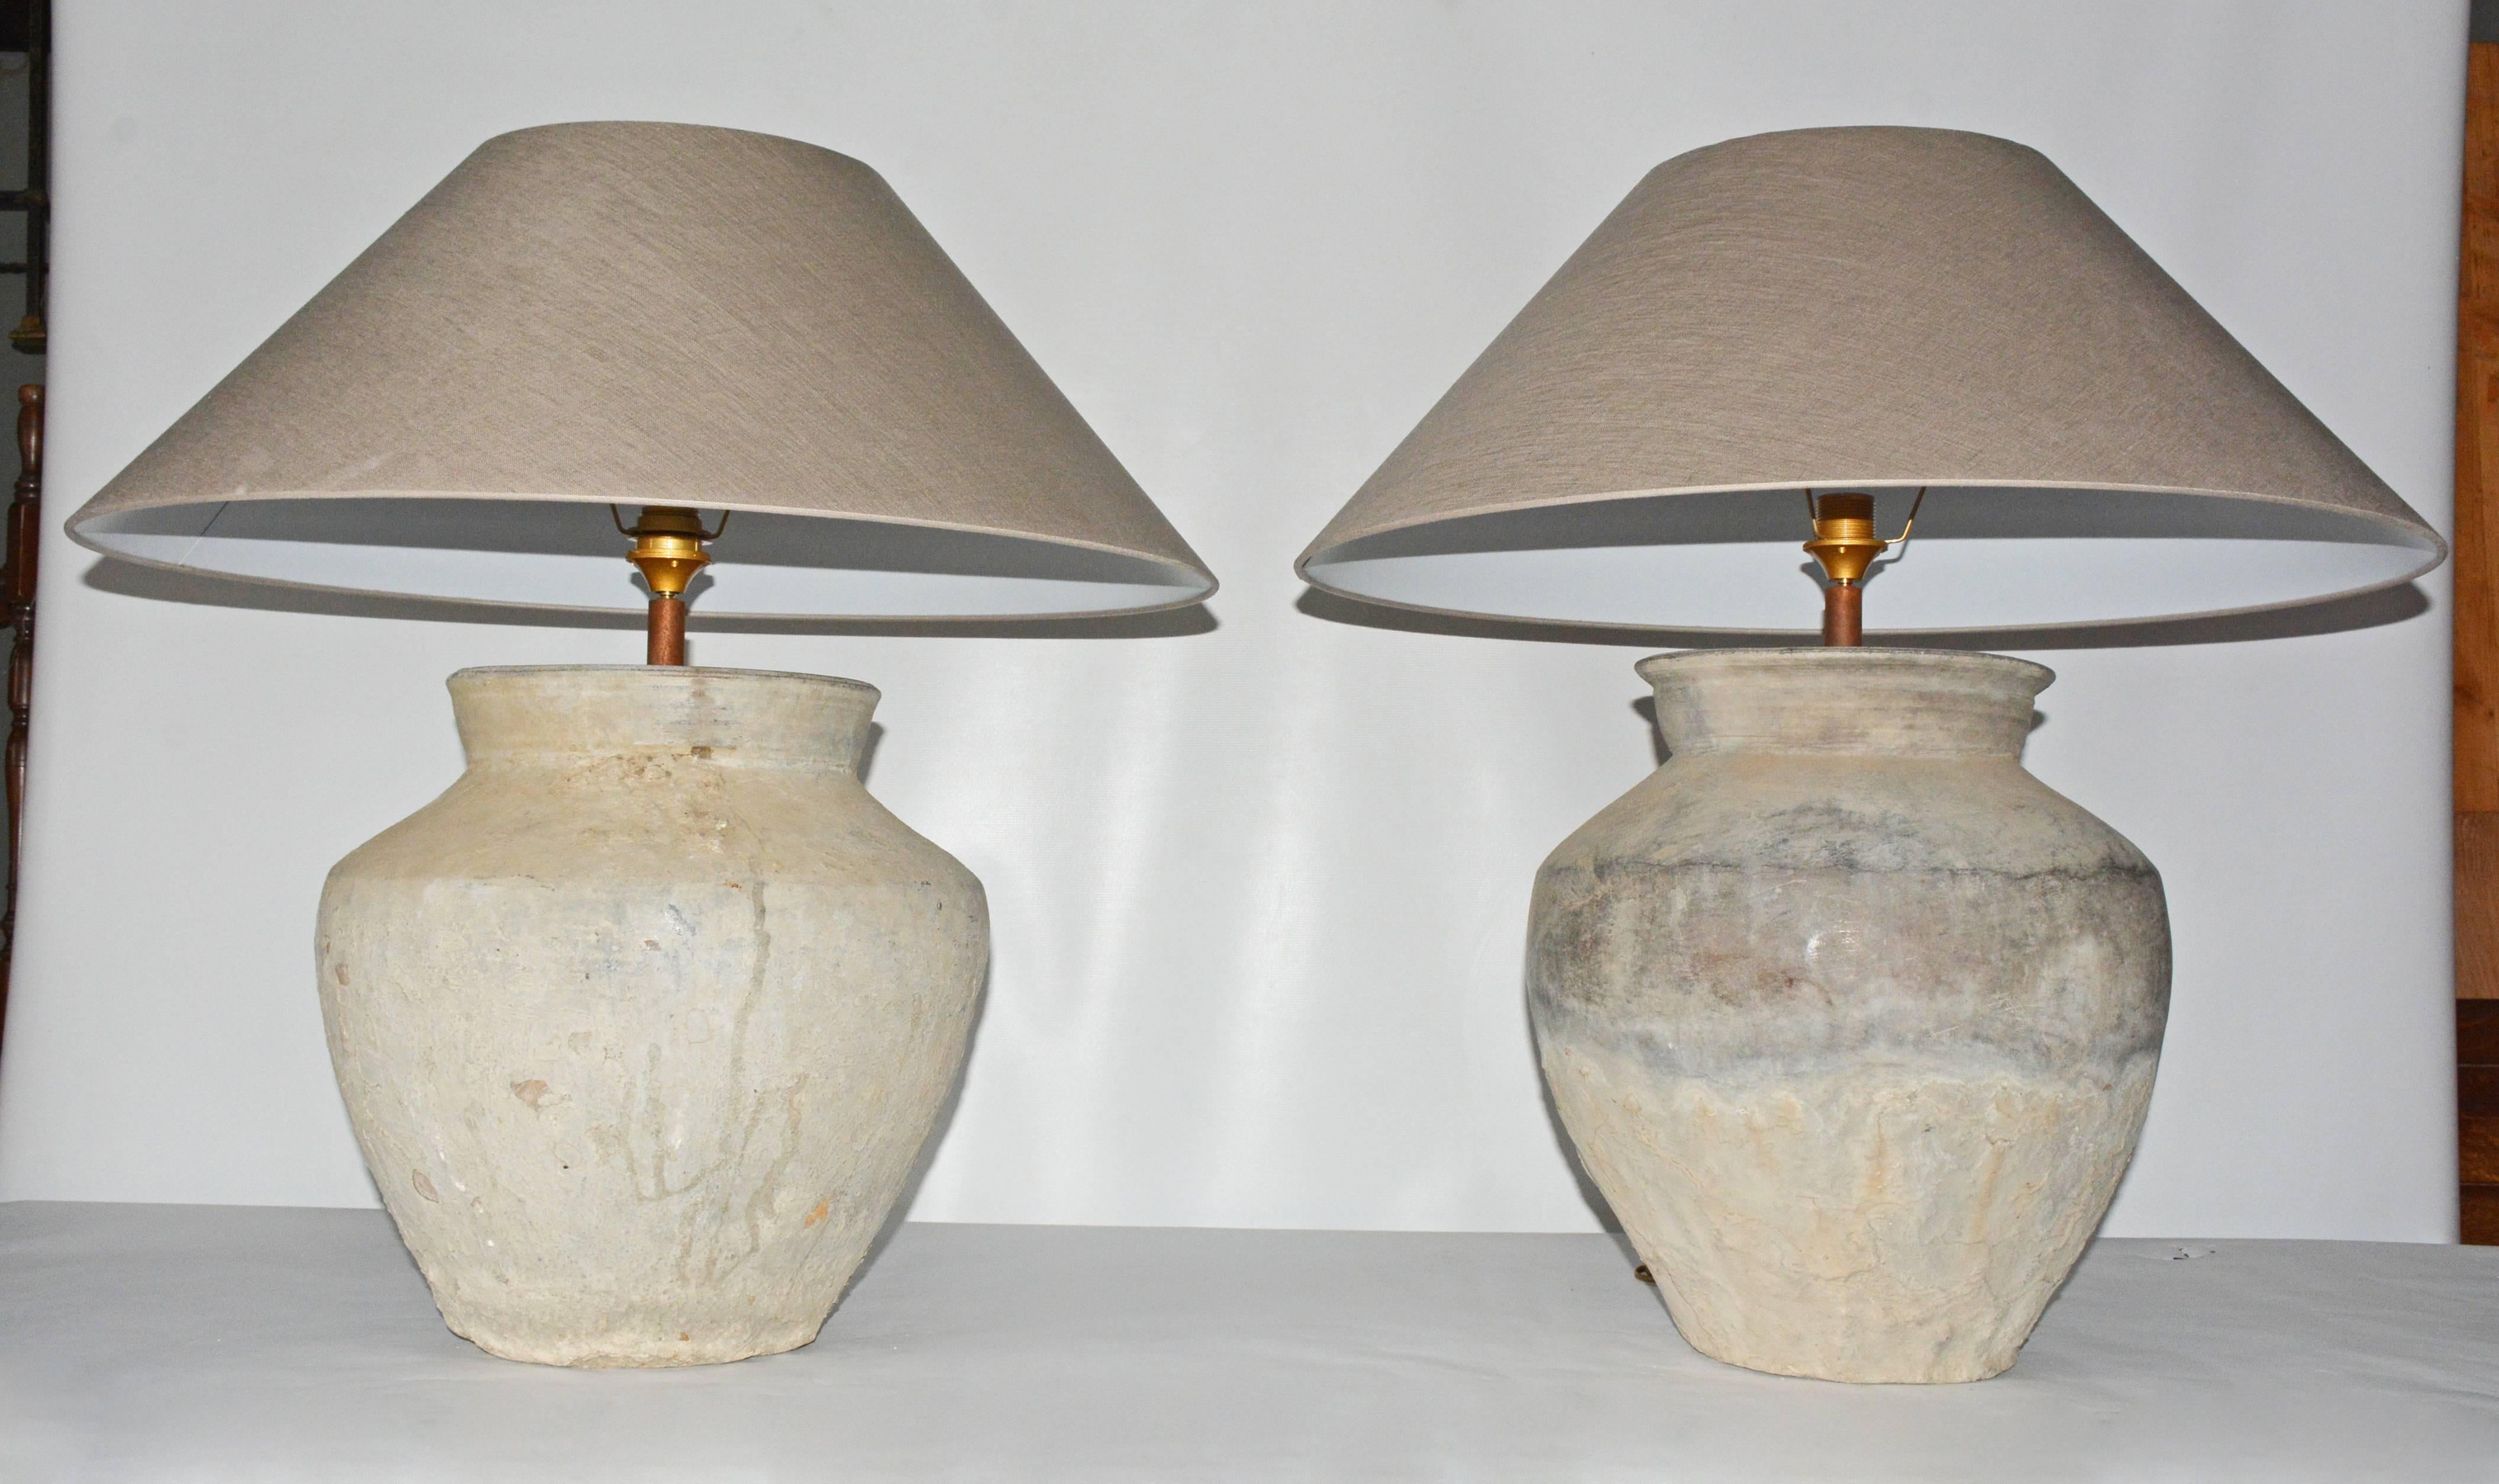 Two similar early large rustic Chinese unglazed terracotta storage jars that has been mounted as a table lamps. The vase has beautiful aged patina from being buried perhaps for centuries.
Handmade taupe color Belgium linen coolie shape